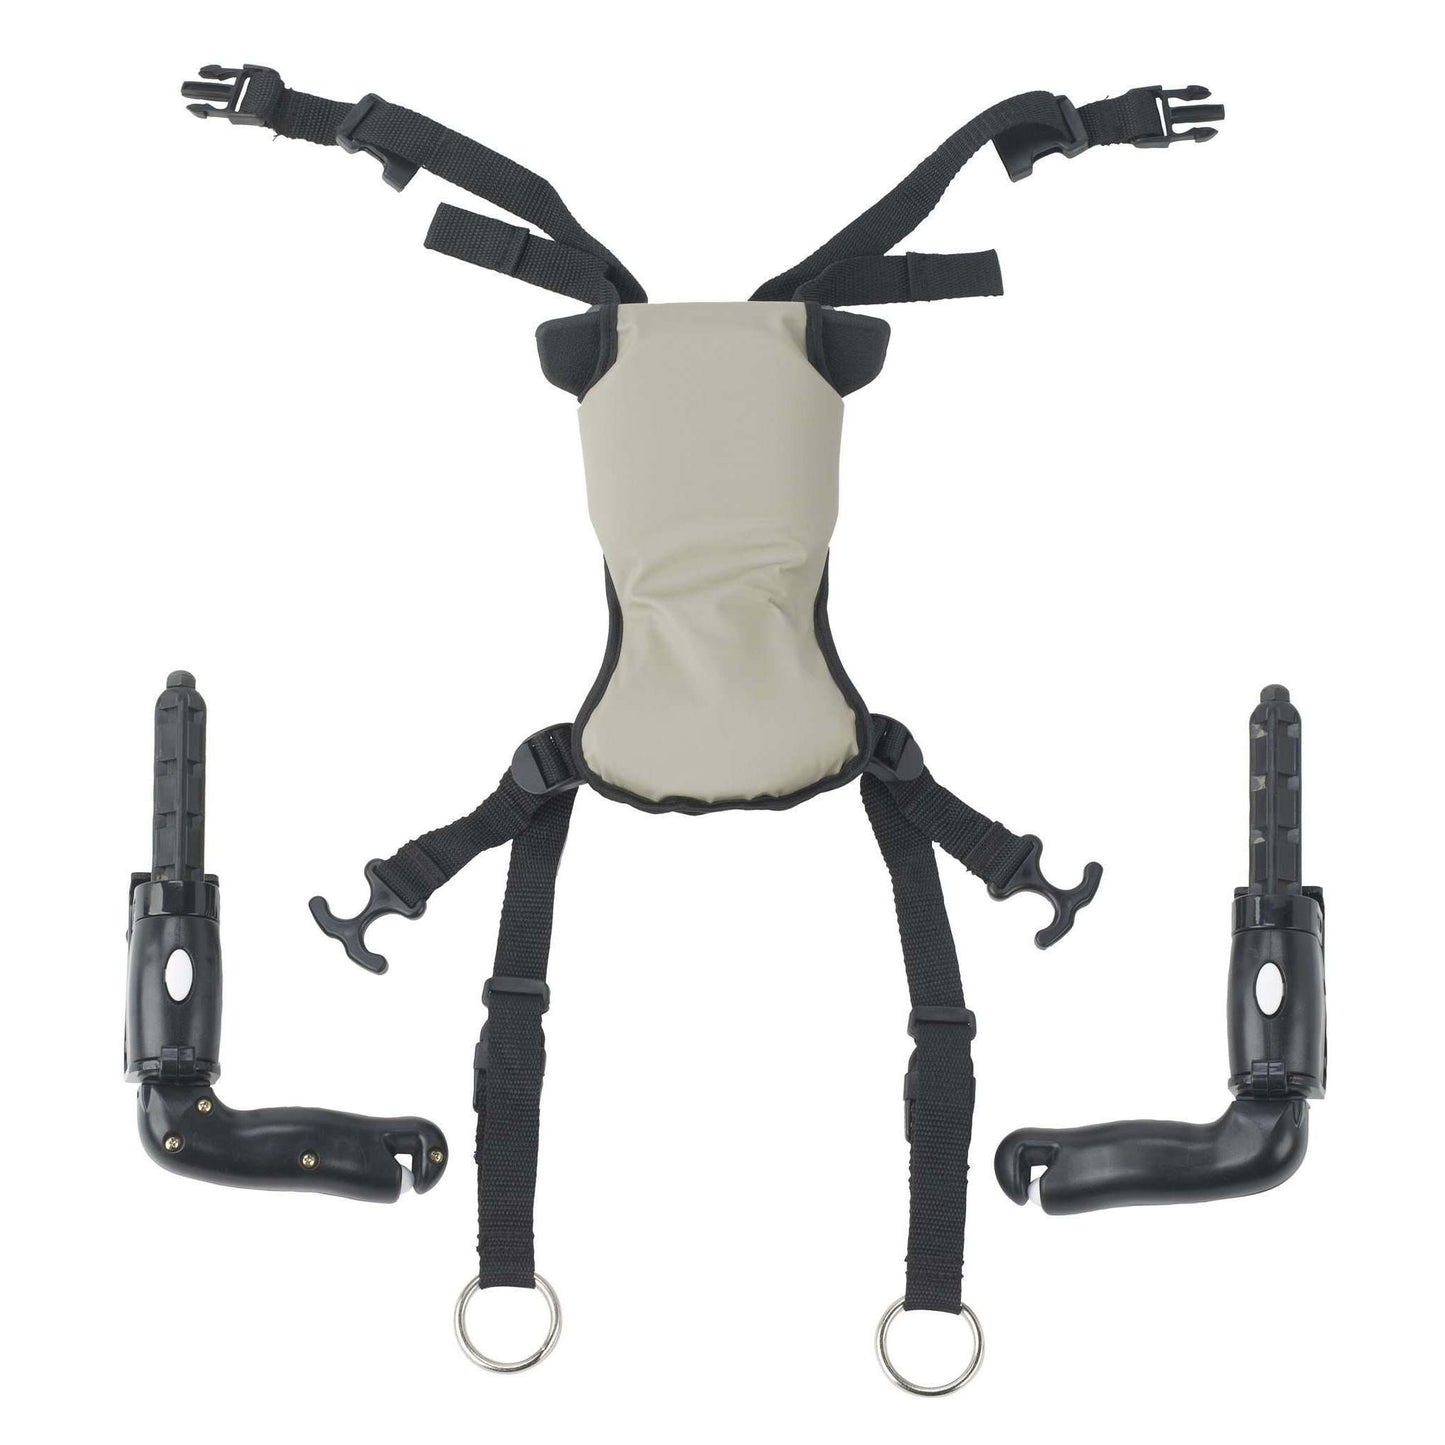 Drive Medical tk 1070 s Trekker Gait Trainer Hip Positioner and Pad, Small